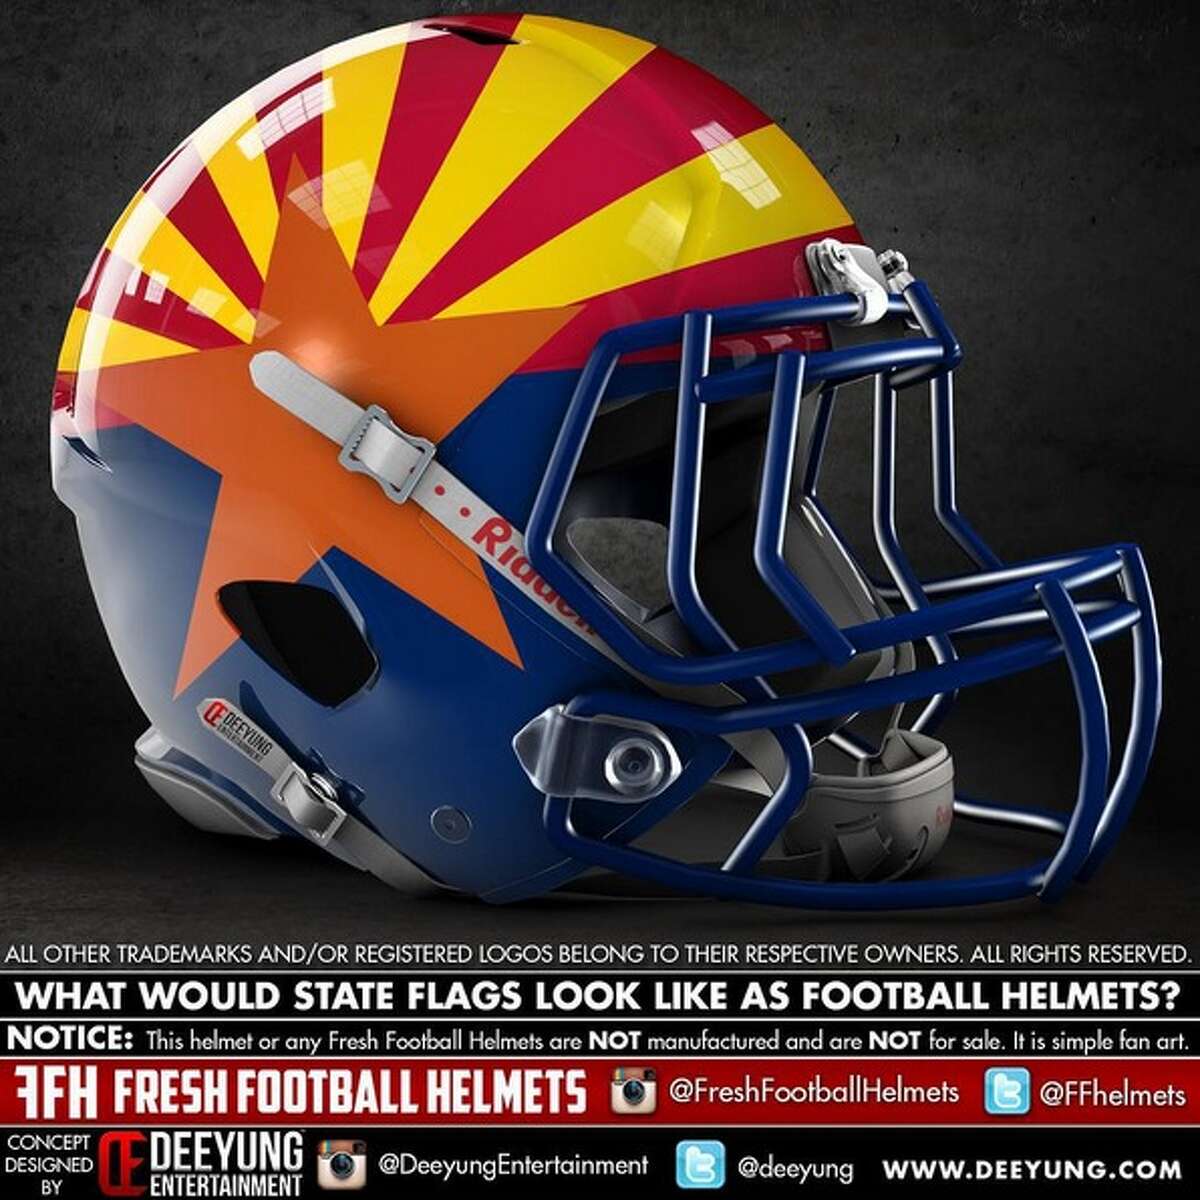 Arizona state flag concept football helmet designed by graphic artist Dylan Young of Deeyung Entertainment.